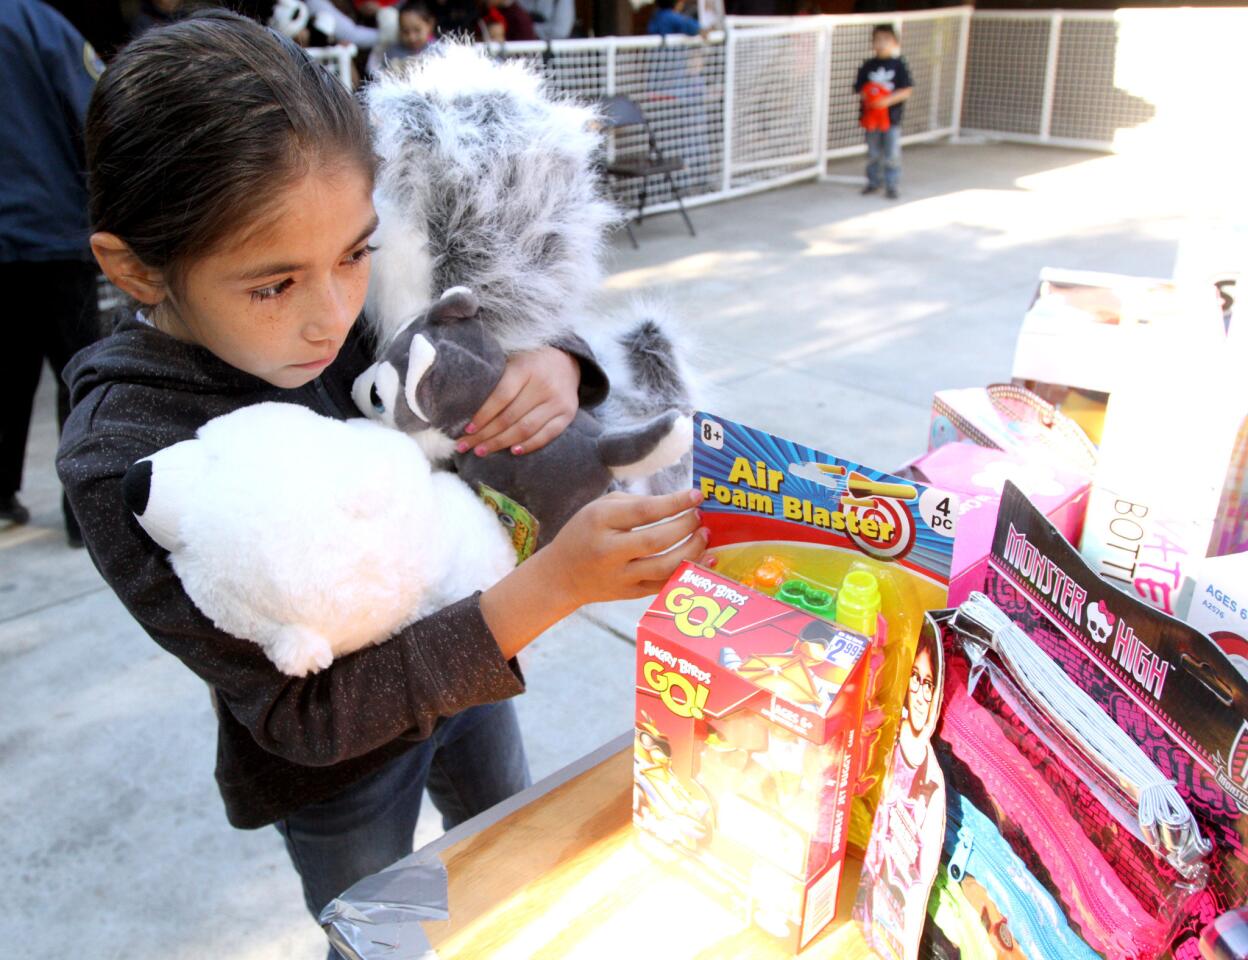 Hannah Covarrubias, 9 of Sun Valley, holds two stuffed toys as she looks for another toy she will take home with her during the Crescenta Valley Sheriff Station's annual Toy and Food Drive at Crescenta Valley Park in La Crescenta on Saturday, Dec. 19, 2015.